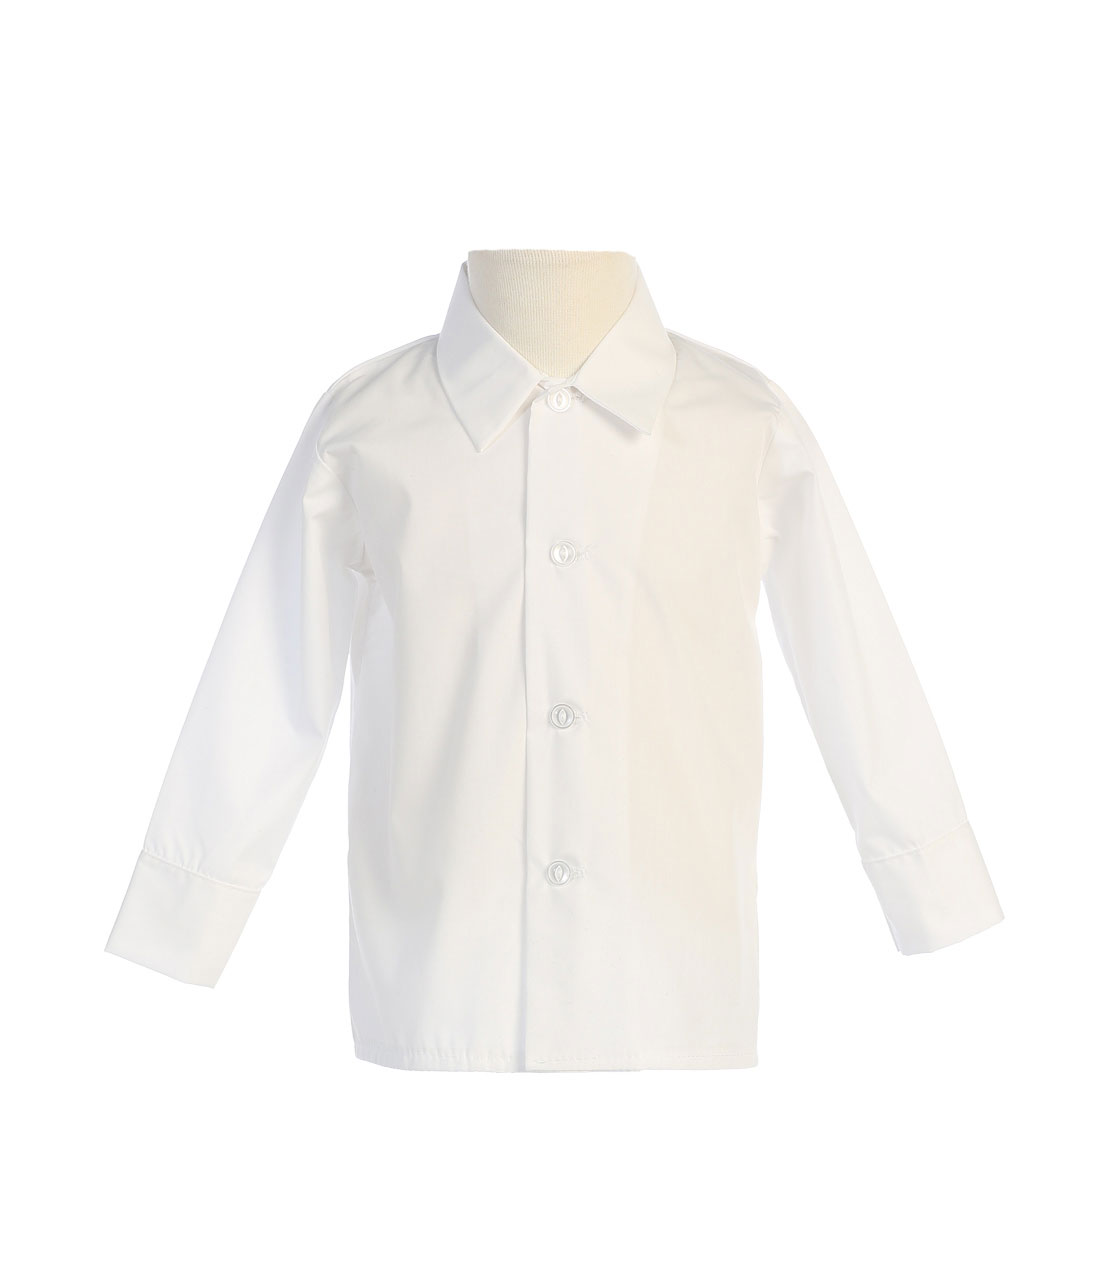 Boys Long Sleeved Simple Dress Shirt - Available in White 5